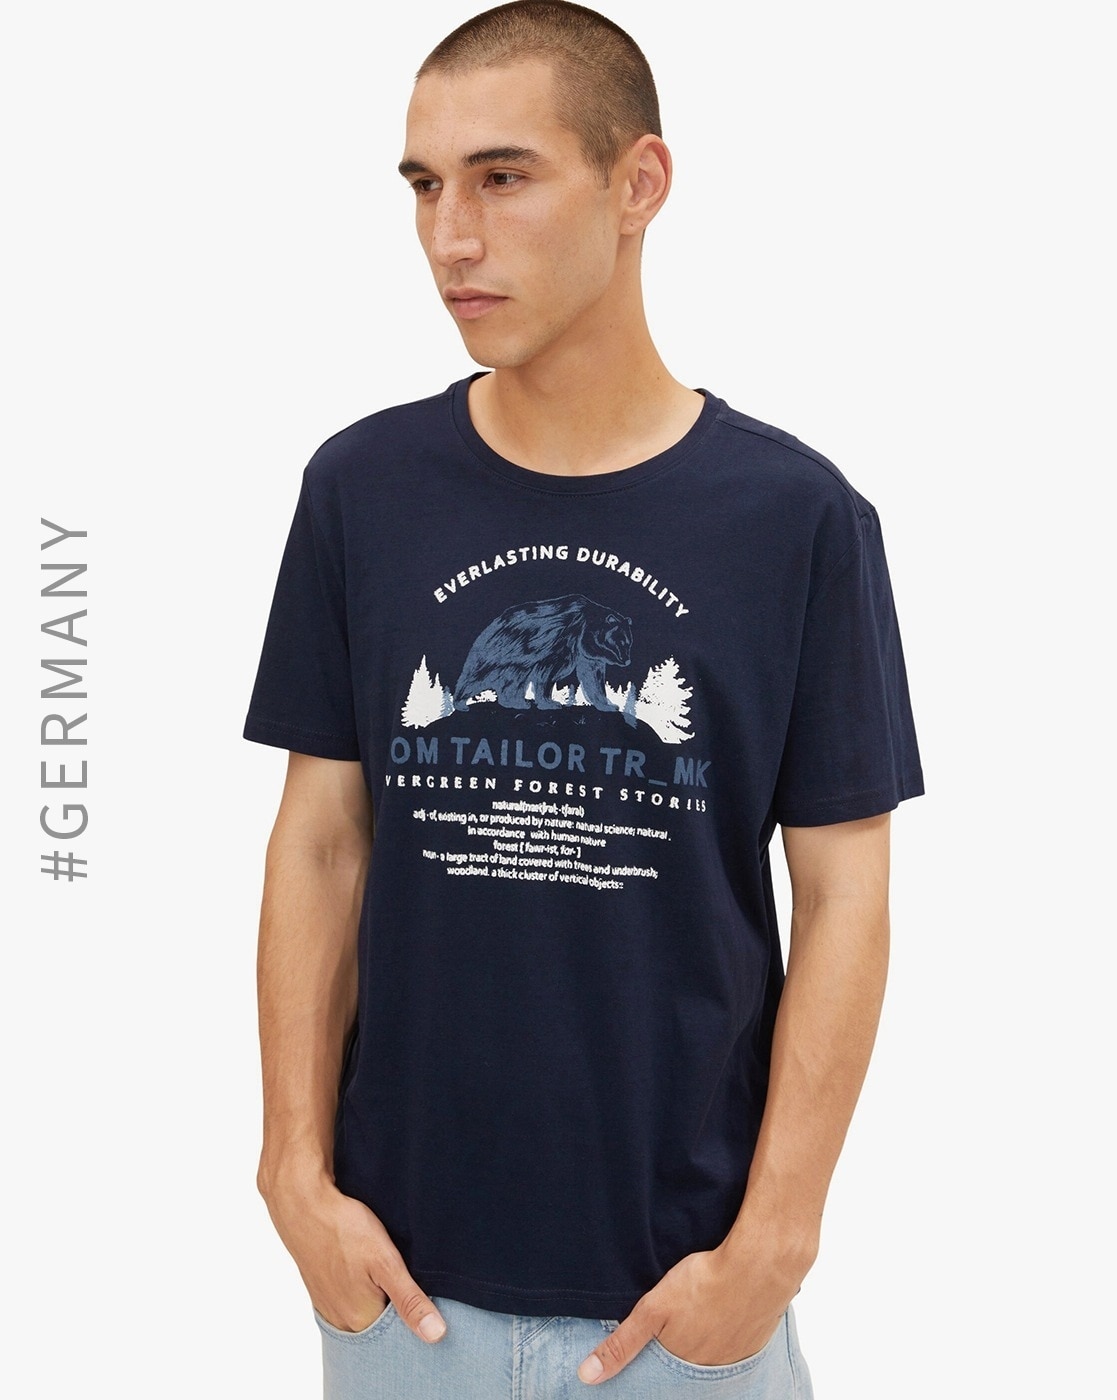 Buy Blue Tshirts for Men Tom Online by Tailor